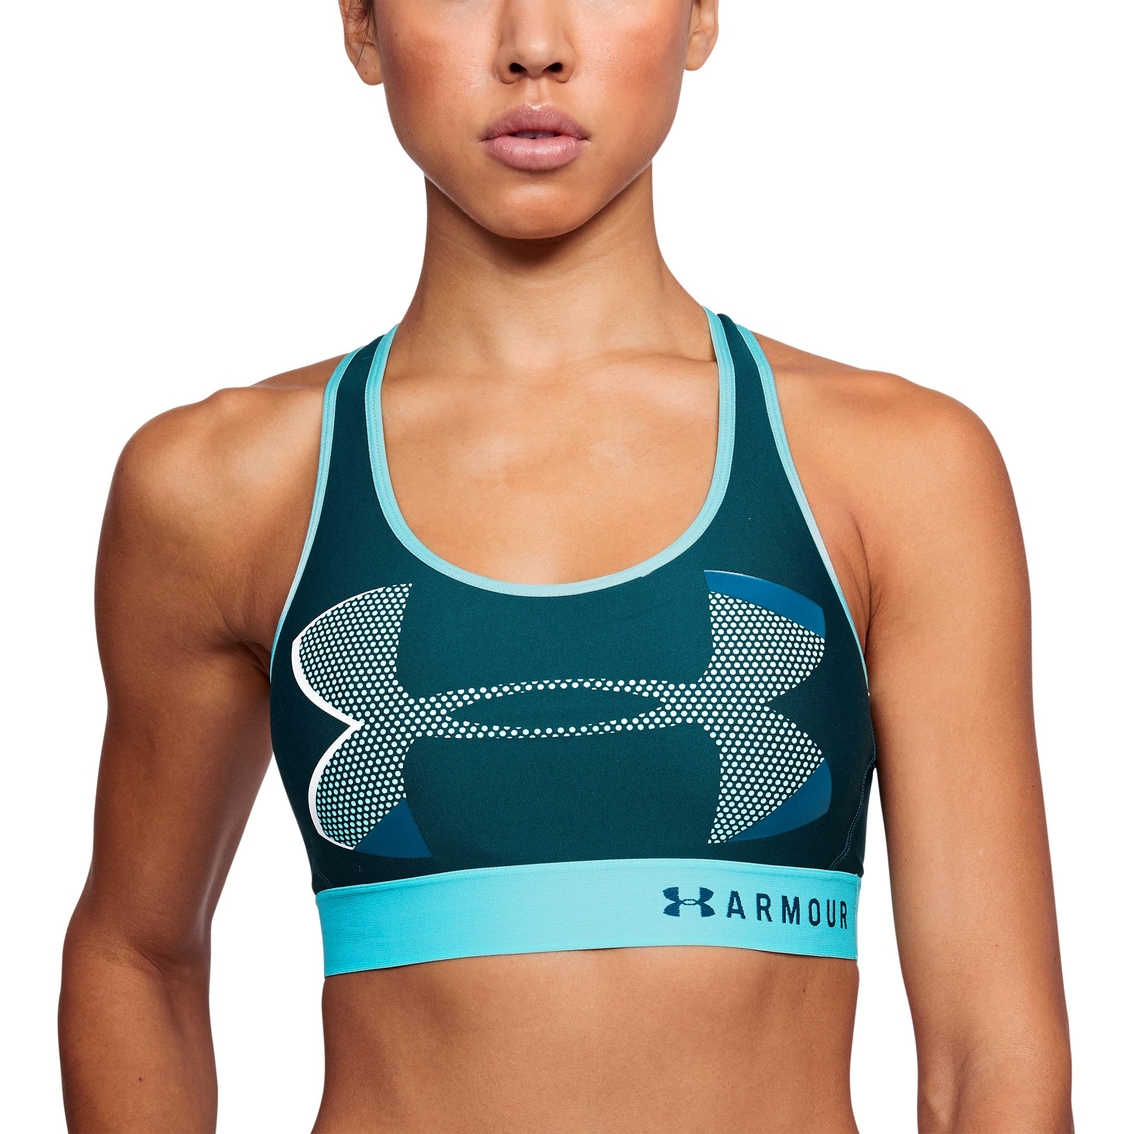 51 HQ Images Under Armor Sports Bras Sale : Under Armour 'Armour' Sports Bra (D Cup) | Nordstrom